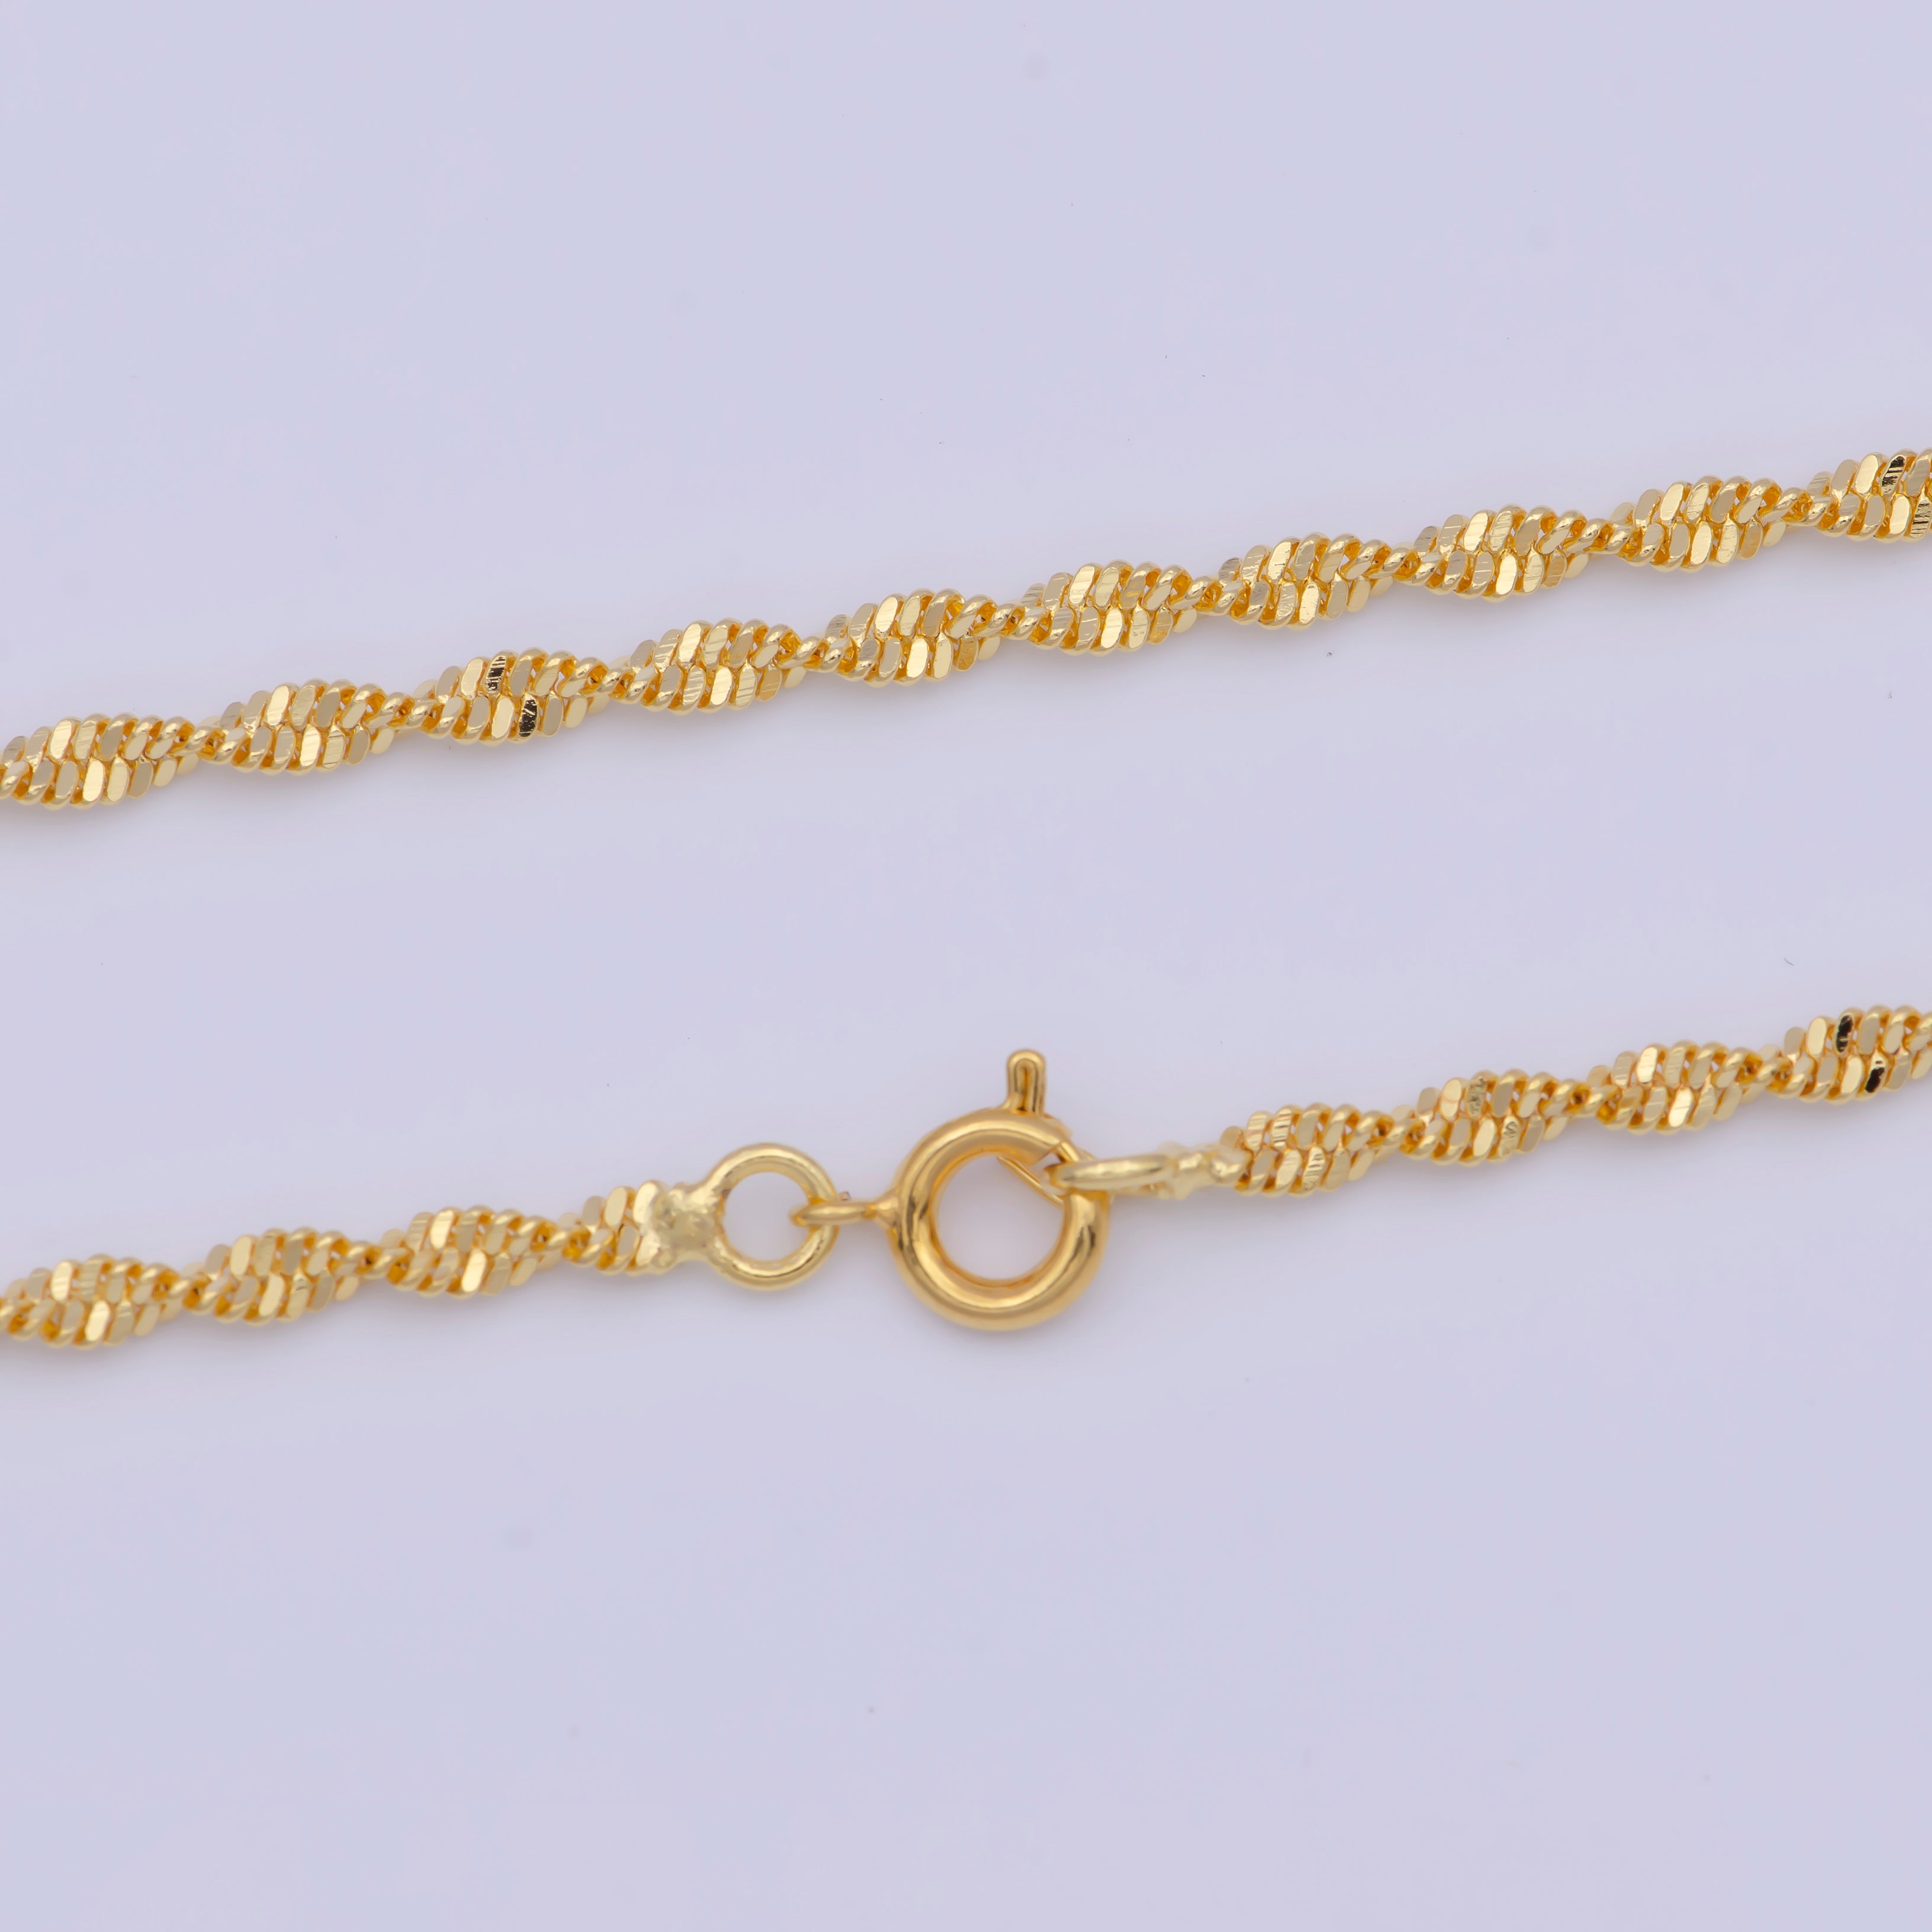 Yellow Gold Chain Necklace, Twist Chain Necklace Ready To Wear for Jewelry Making WA-1129 - DLUXCA